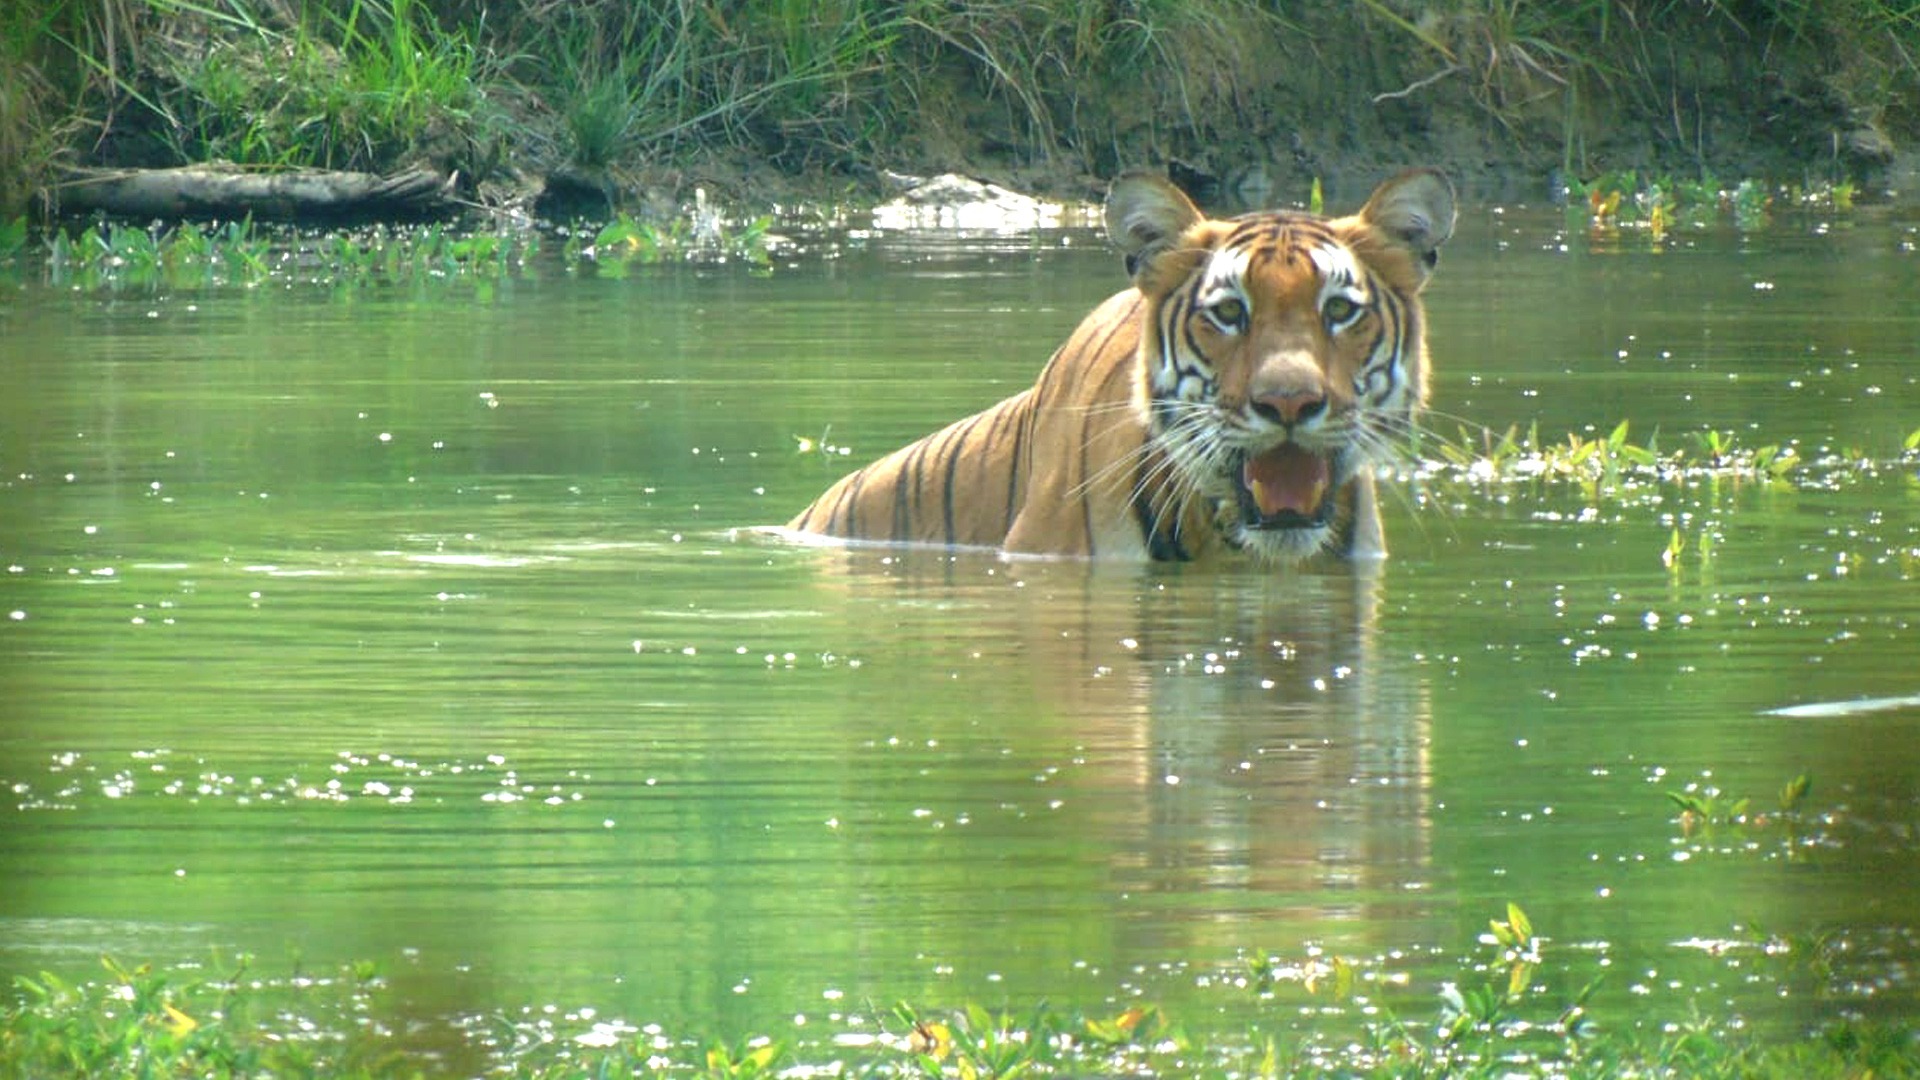 Tiger in Chitwan National Park